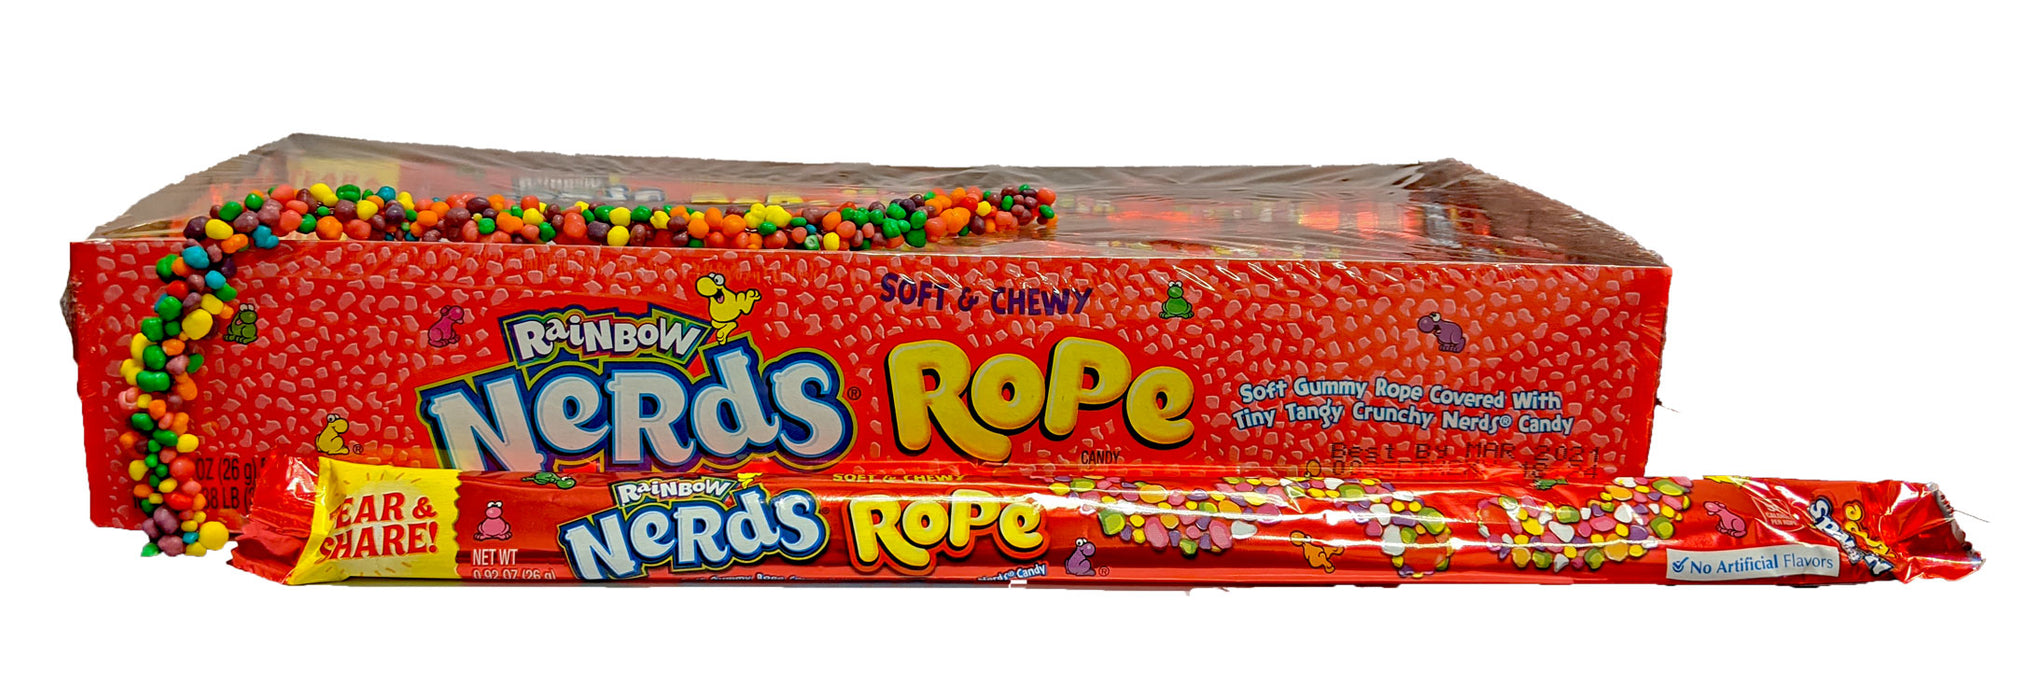 Nerds Rope Rainbow .92oz Rope or 24 Count Box